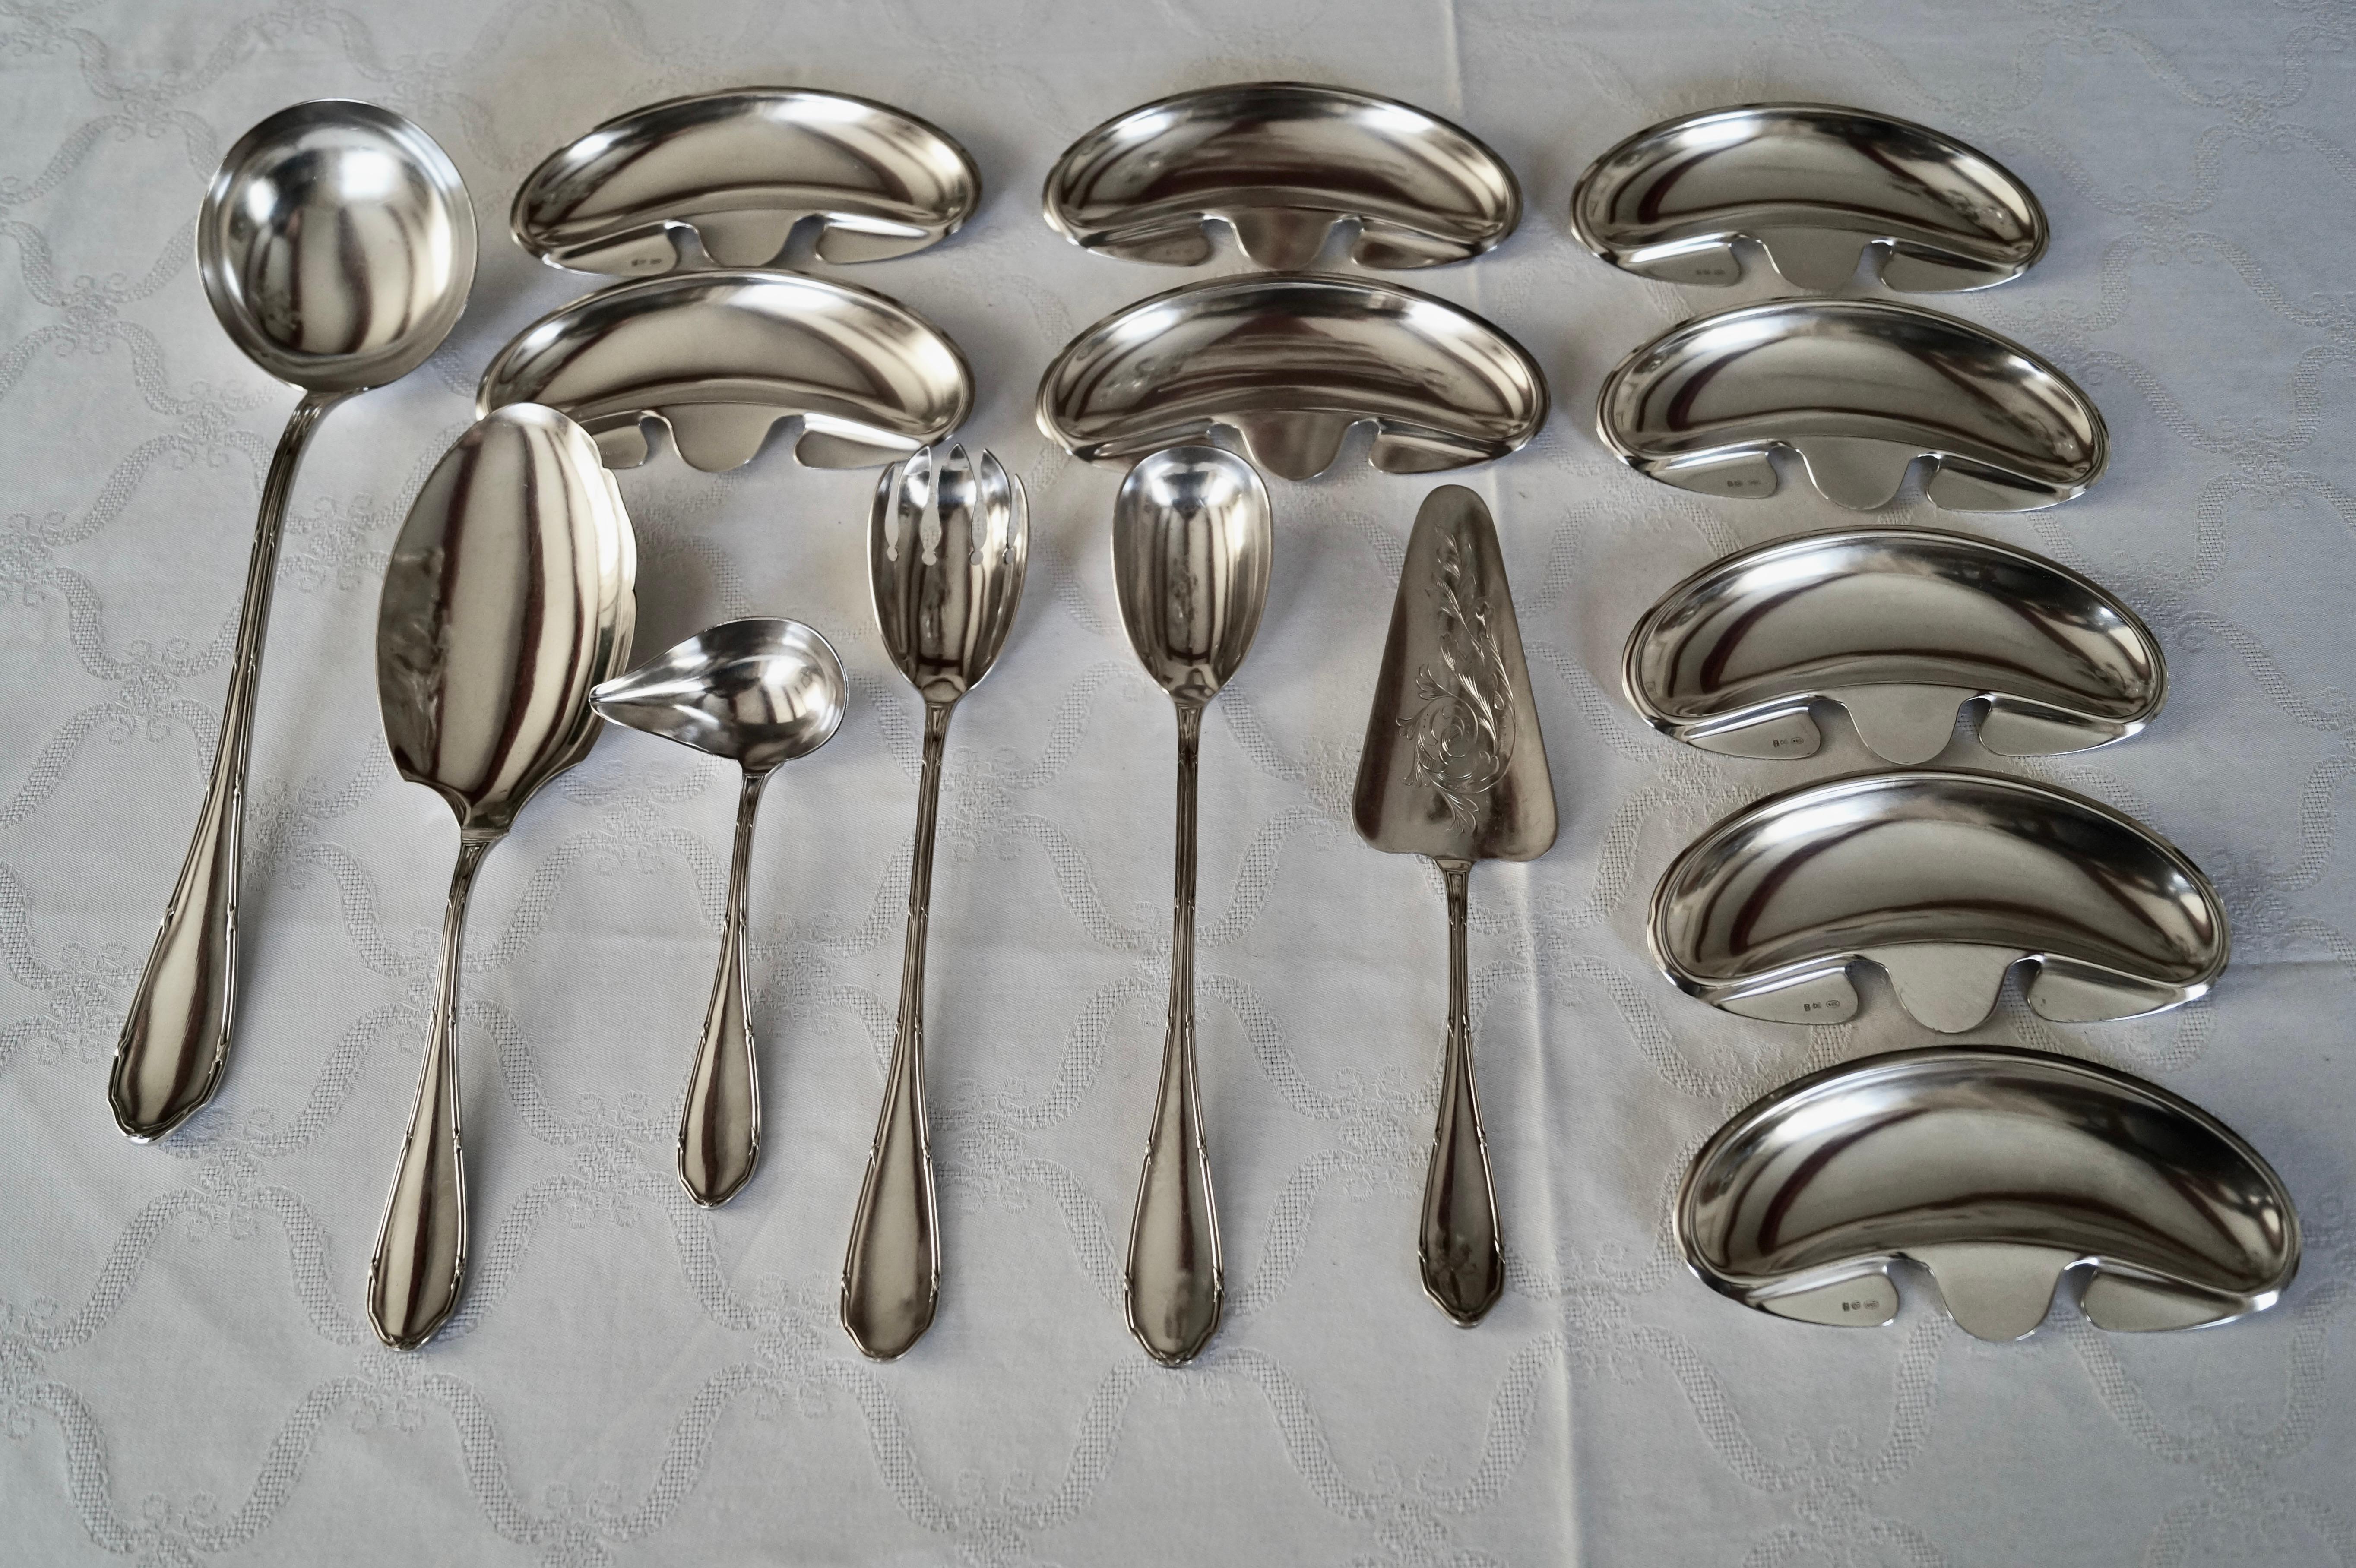 Very extensive beautiful antique silver plated cutlery set of the brand 'Argental' This simple shape (border with cross band) makes it wonderful to combine with beautiful tableware, simple to richly decorated.

Argental can be compared with the